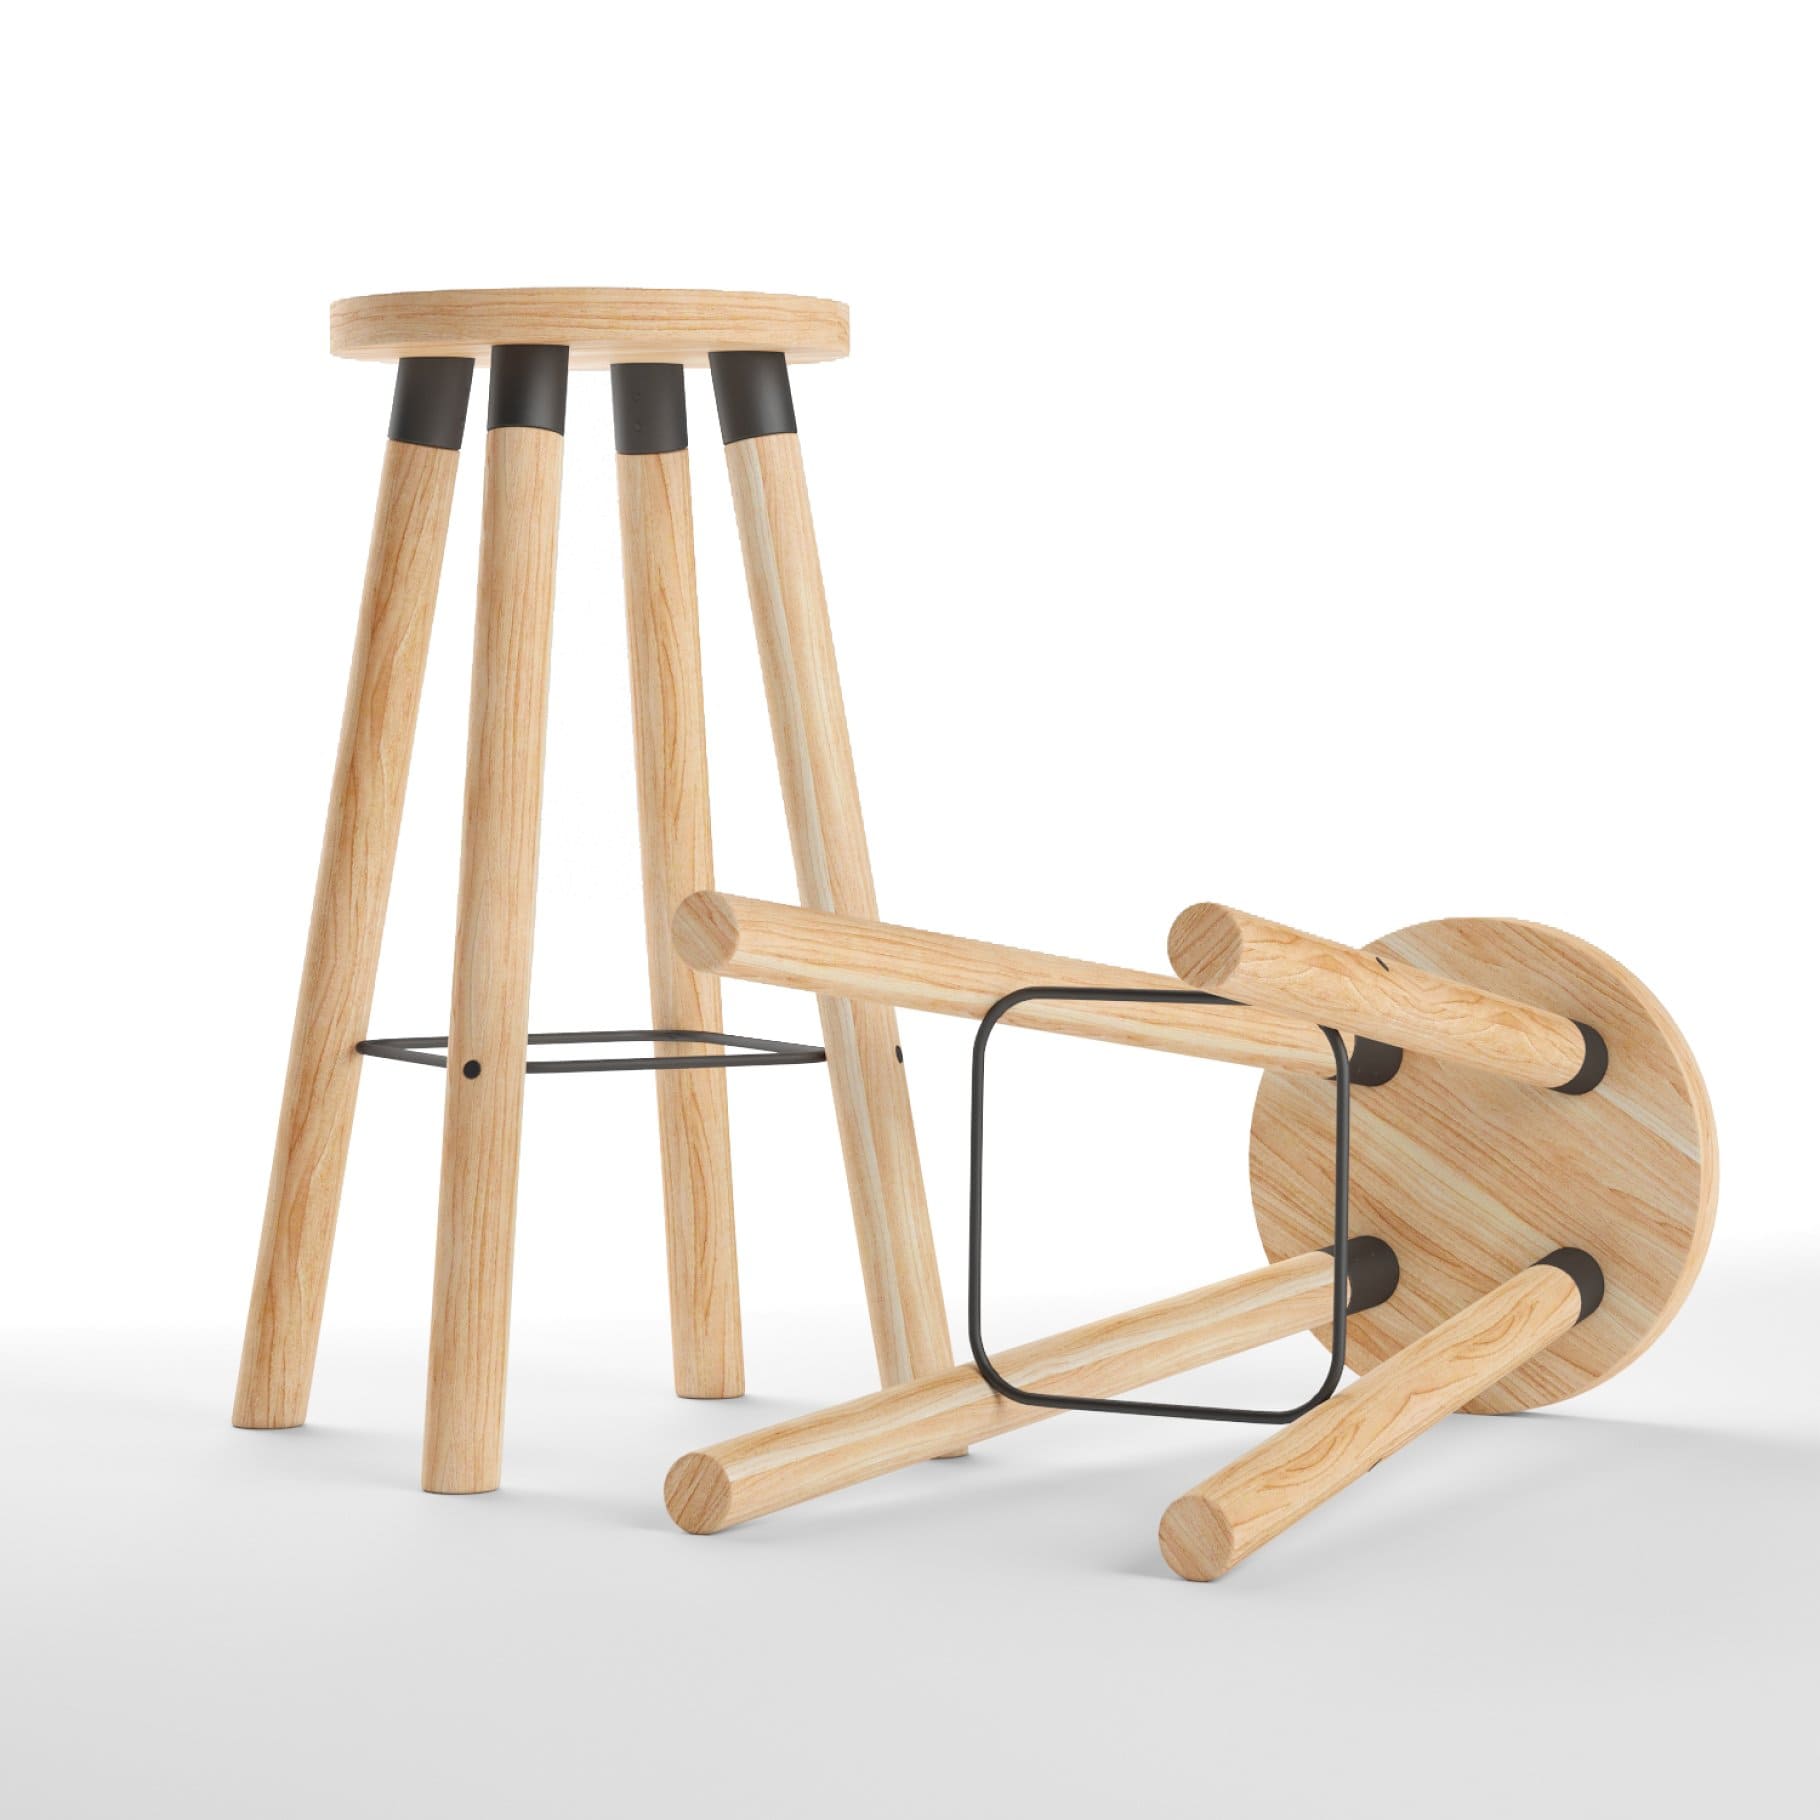 Partridge Bar Stool Design By Them is made of textured wood.